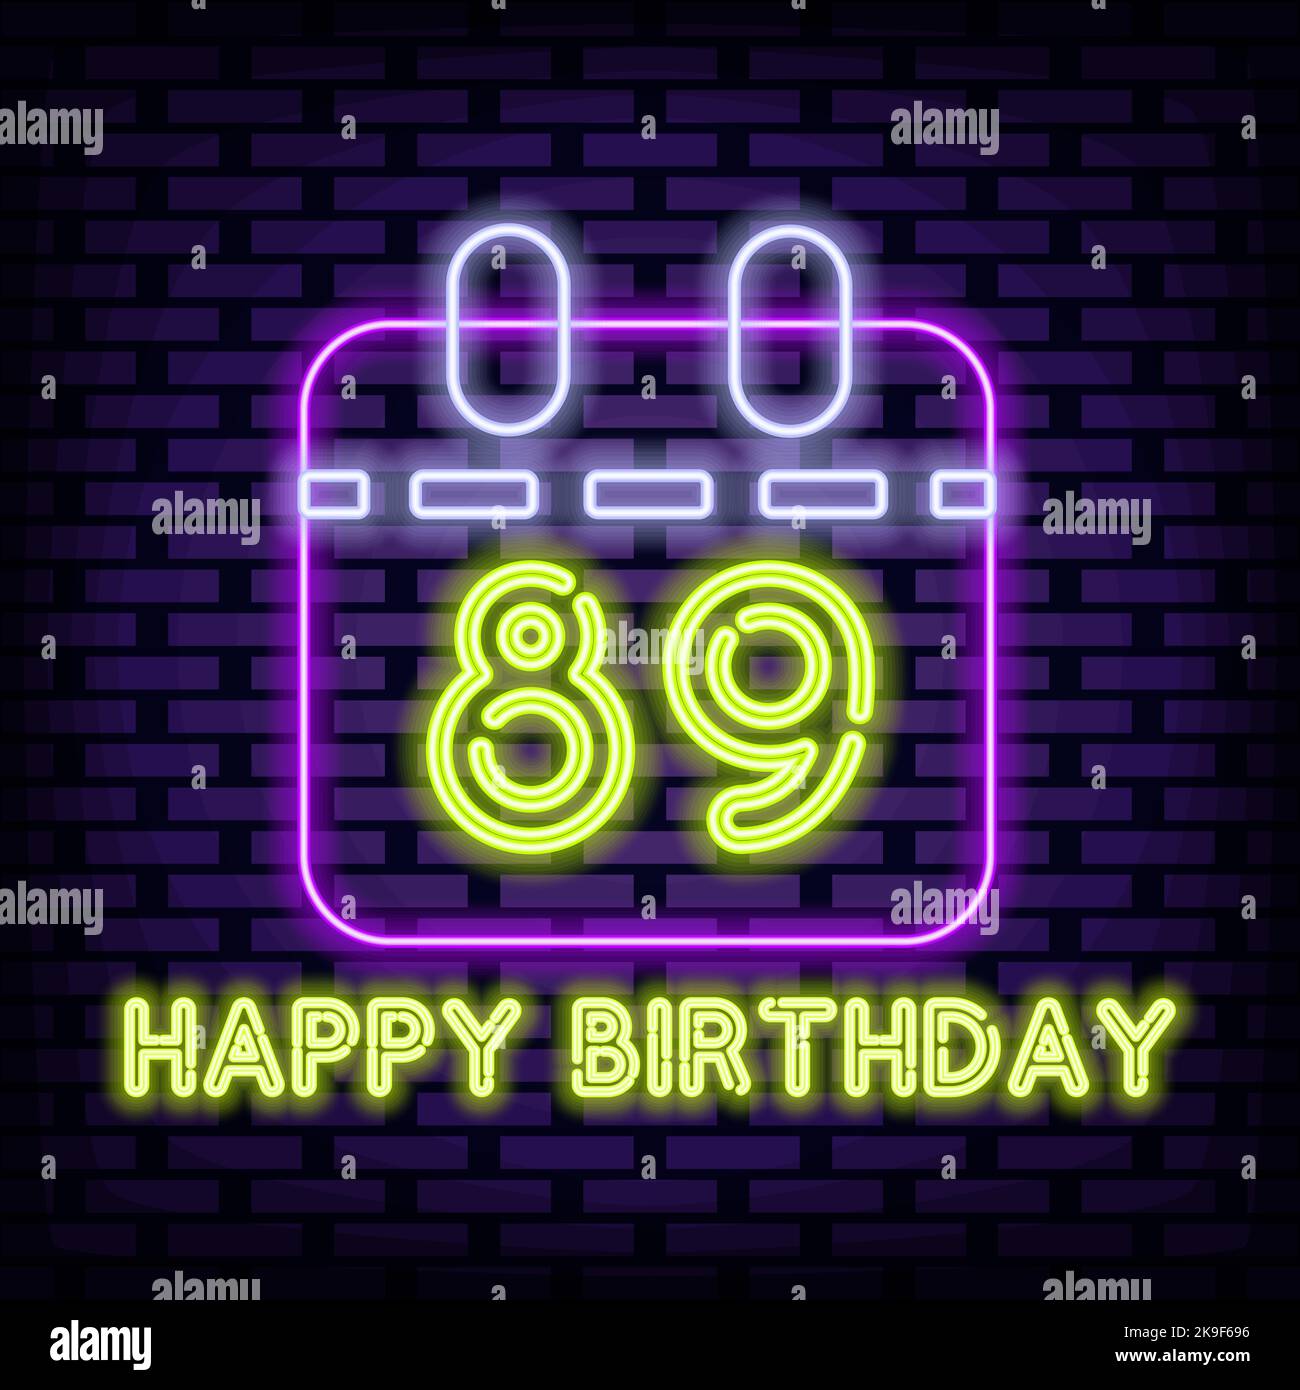 89th Happy Birthday 89 Year old Badge in neon style. On brick wall background. Night bright advertising. Stock Vector